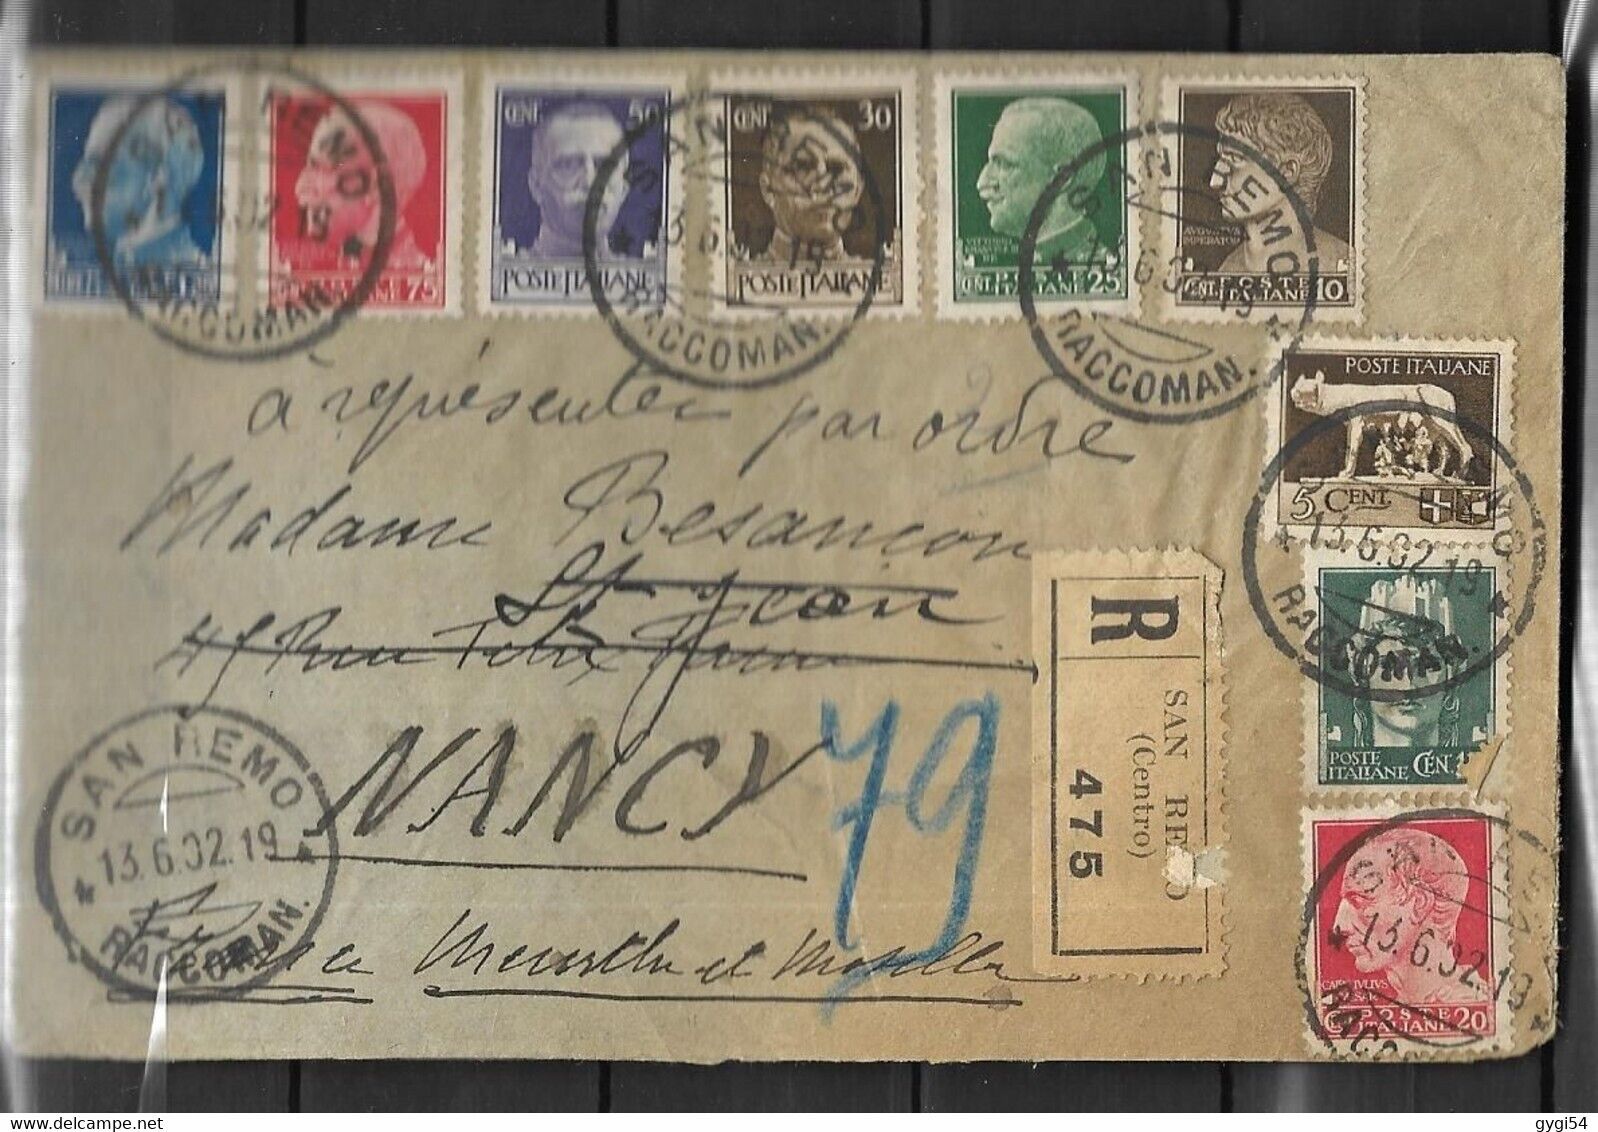 Italy 13 06 1932 San Remo Recommended Letter for Nancy